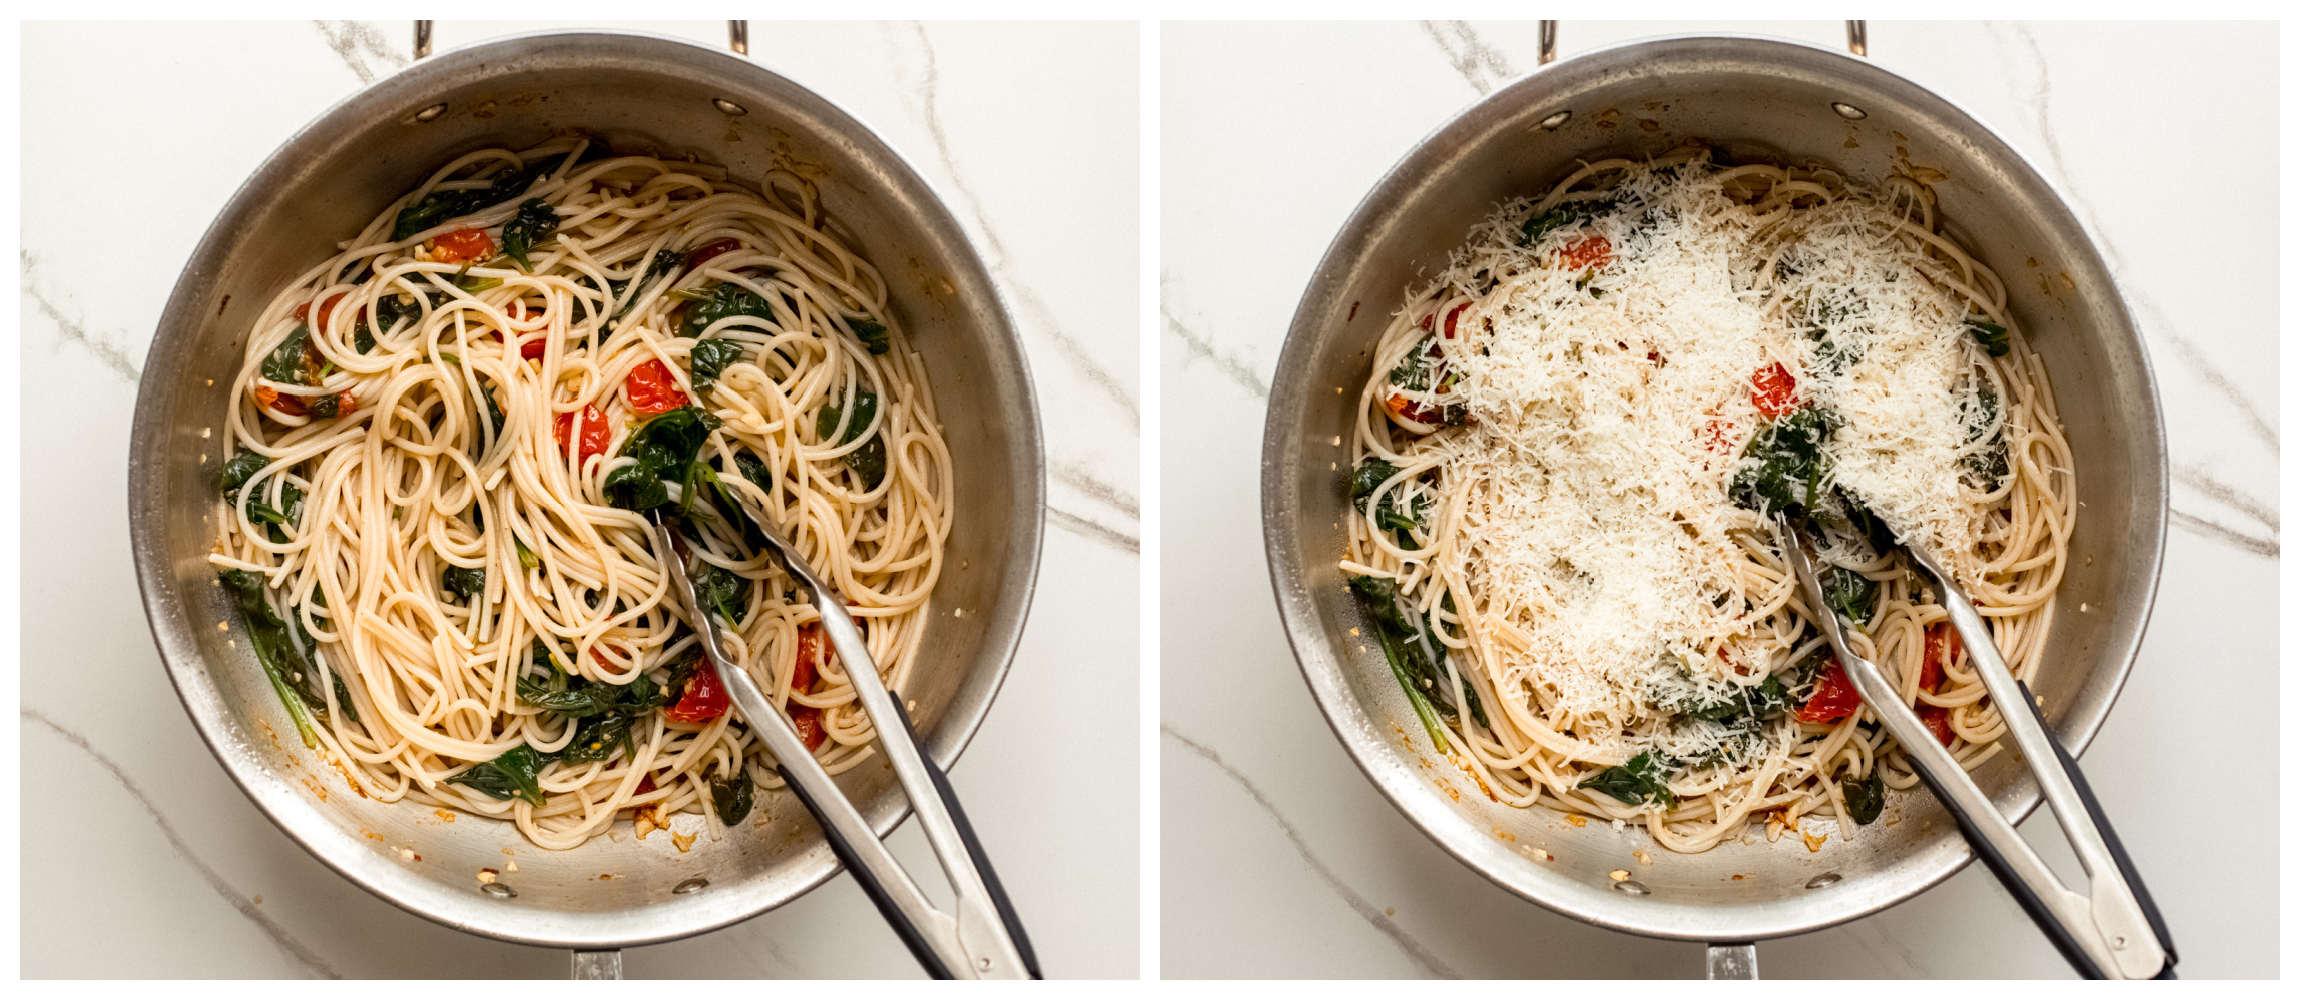 two saute pan photos showing spaghetti with sauce in one, and parmesan cheese over spaghetti and sauce in second.